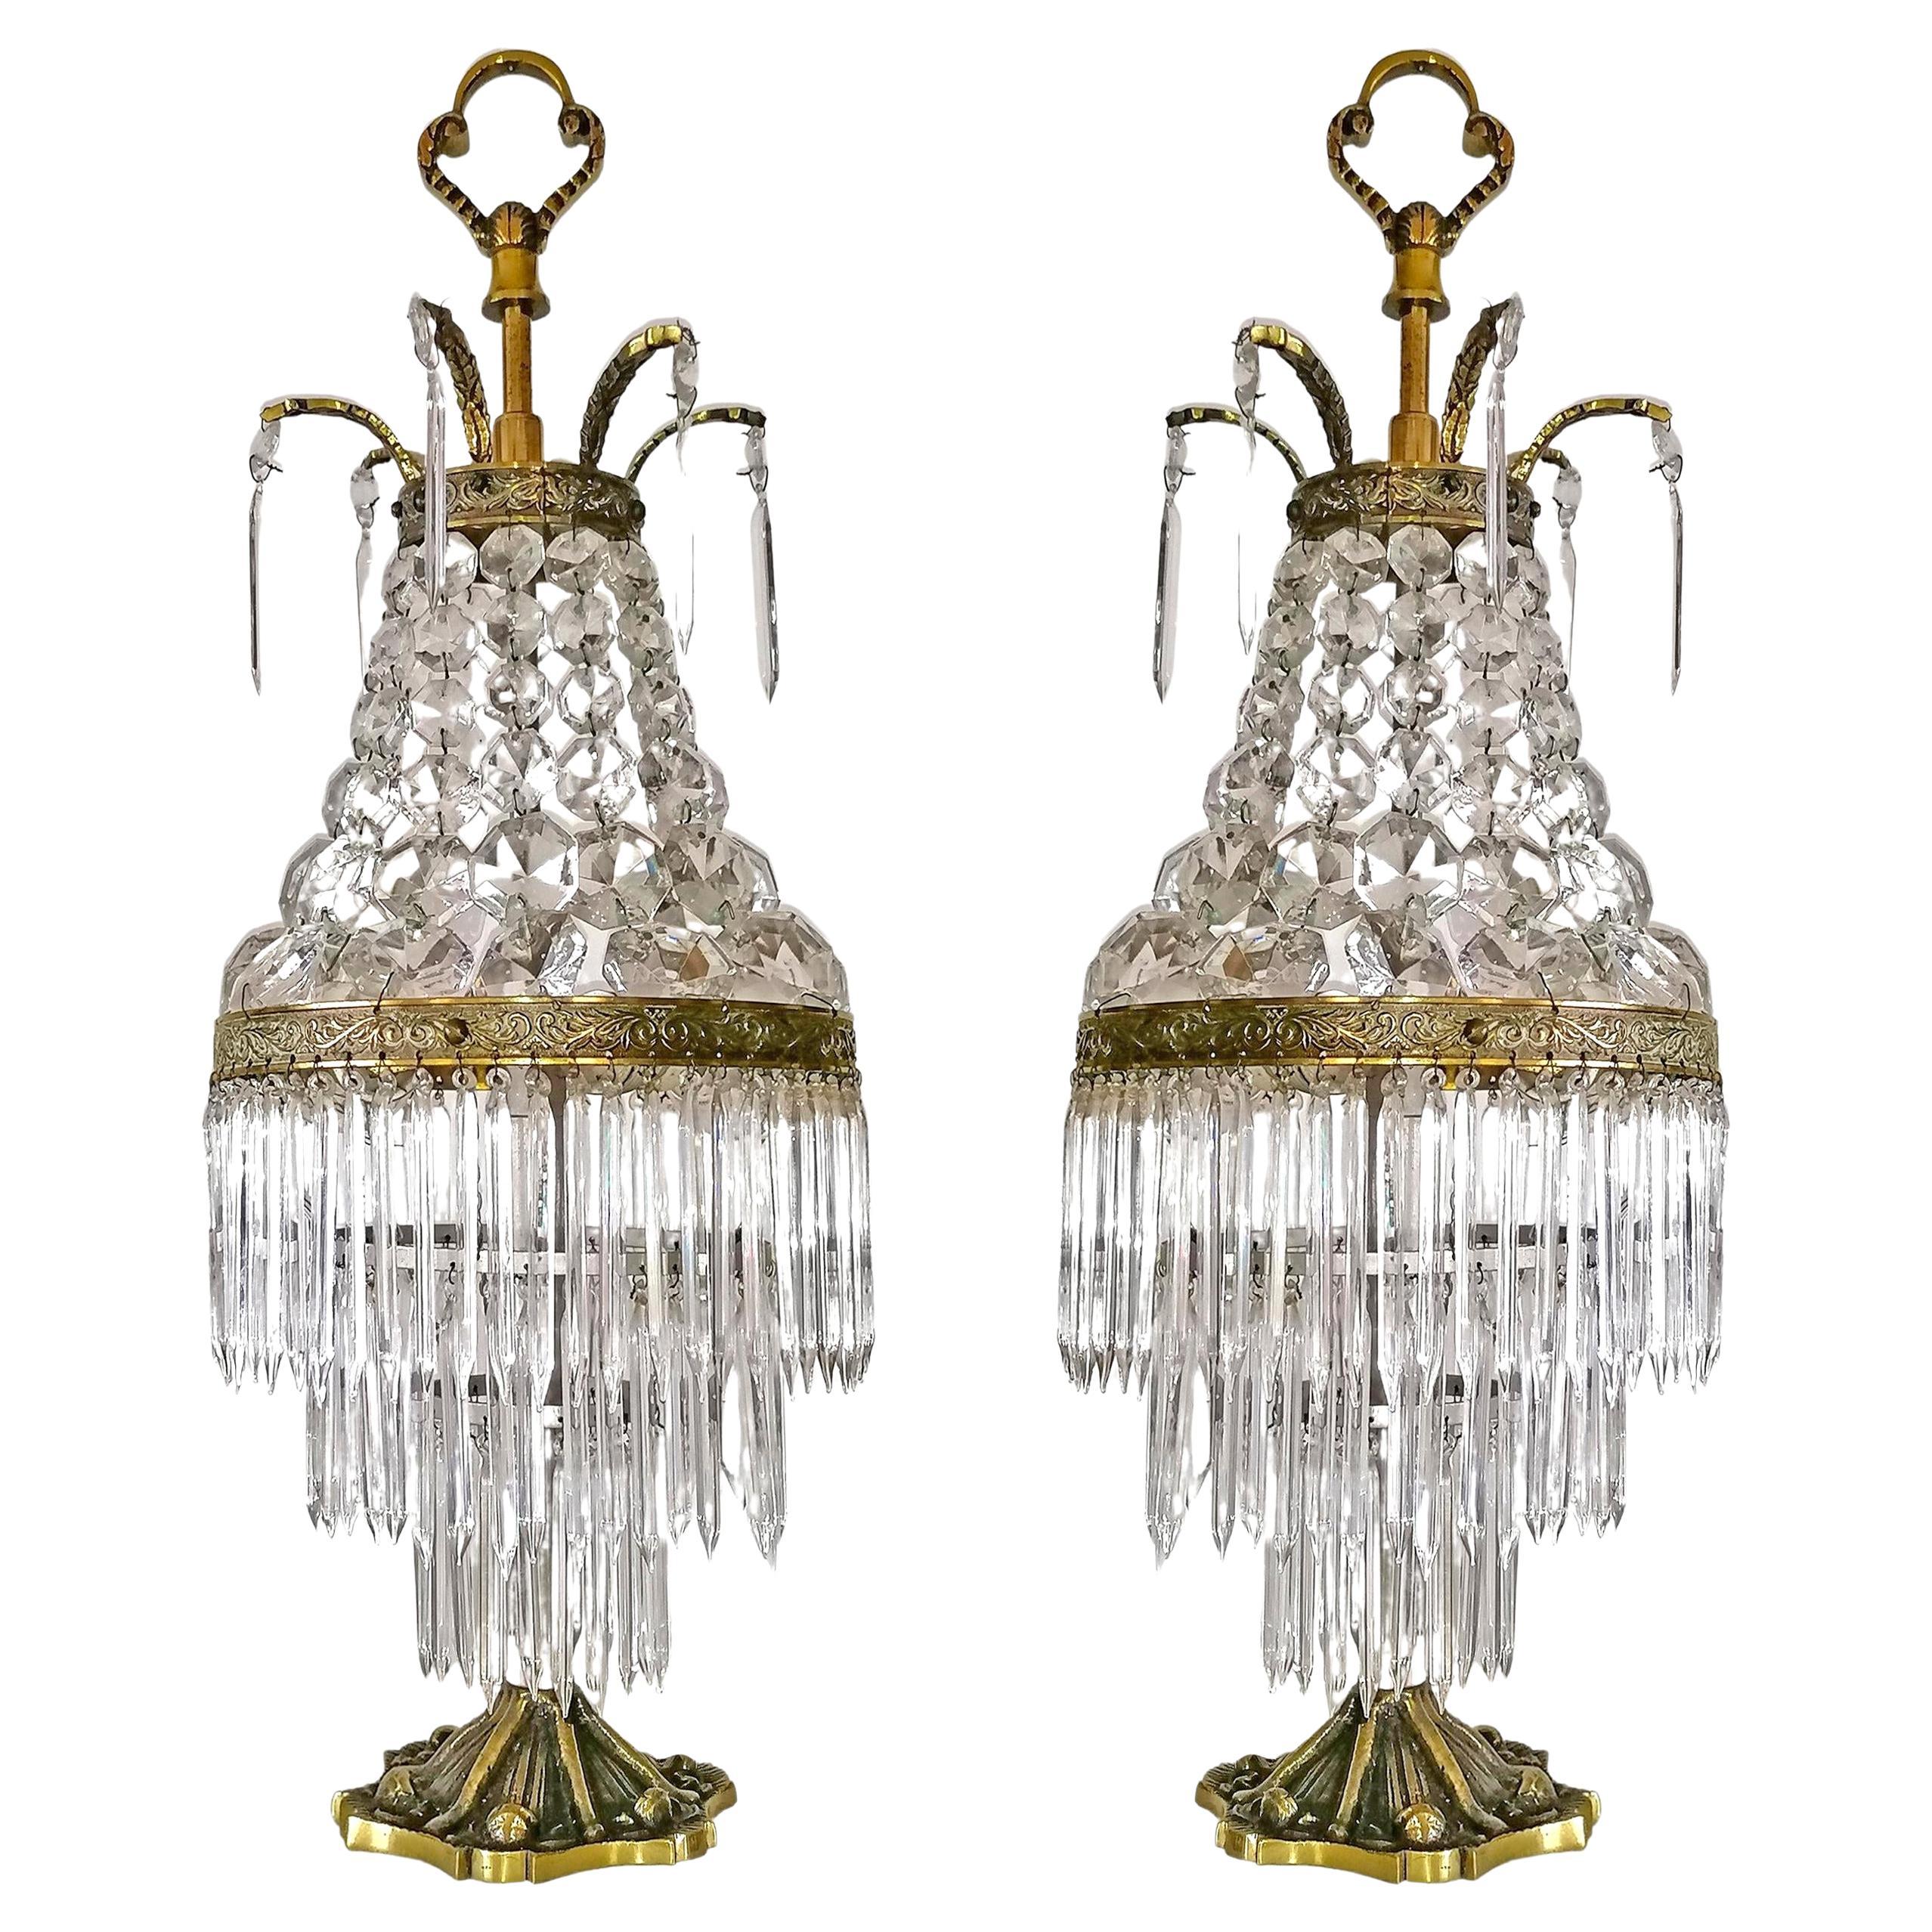 Pair of French Regency Empire Table Lamps in Gilt Bronze and Crystal